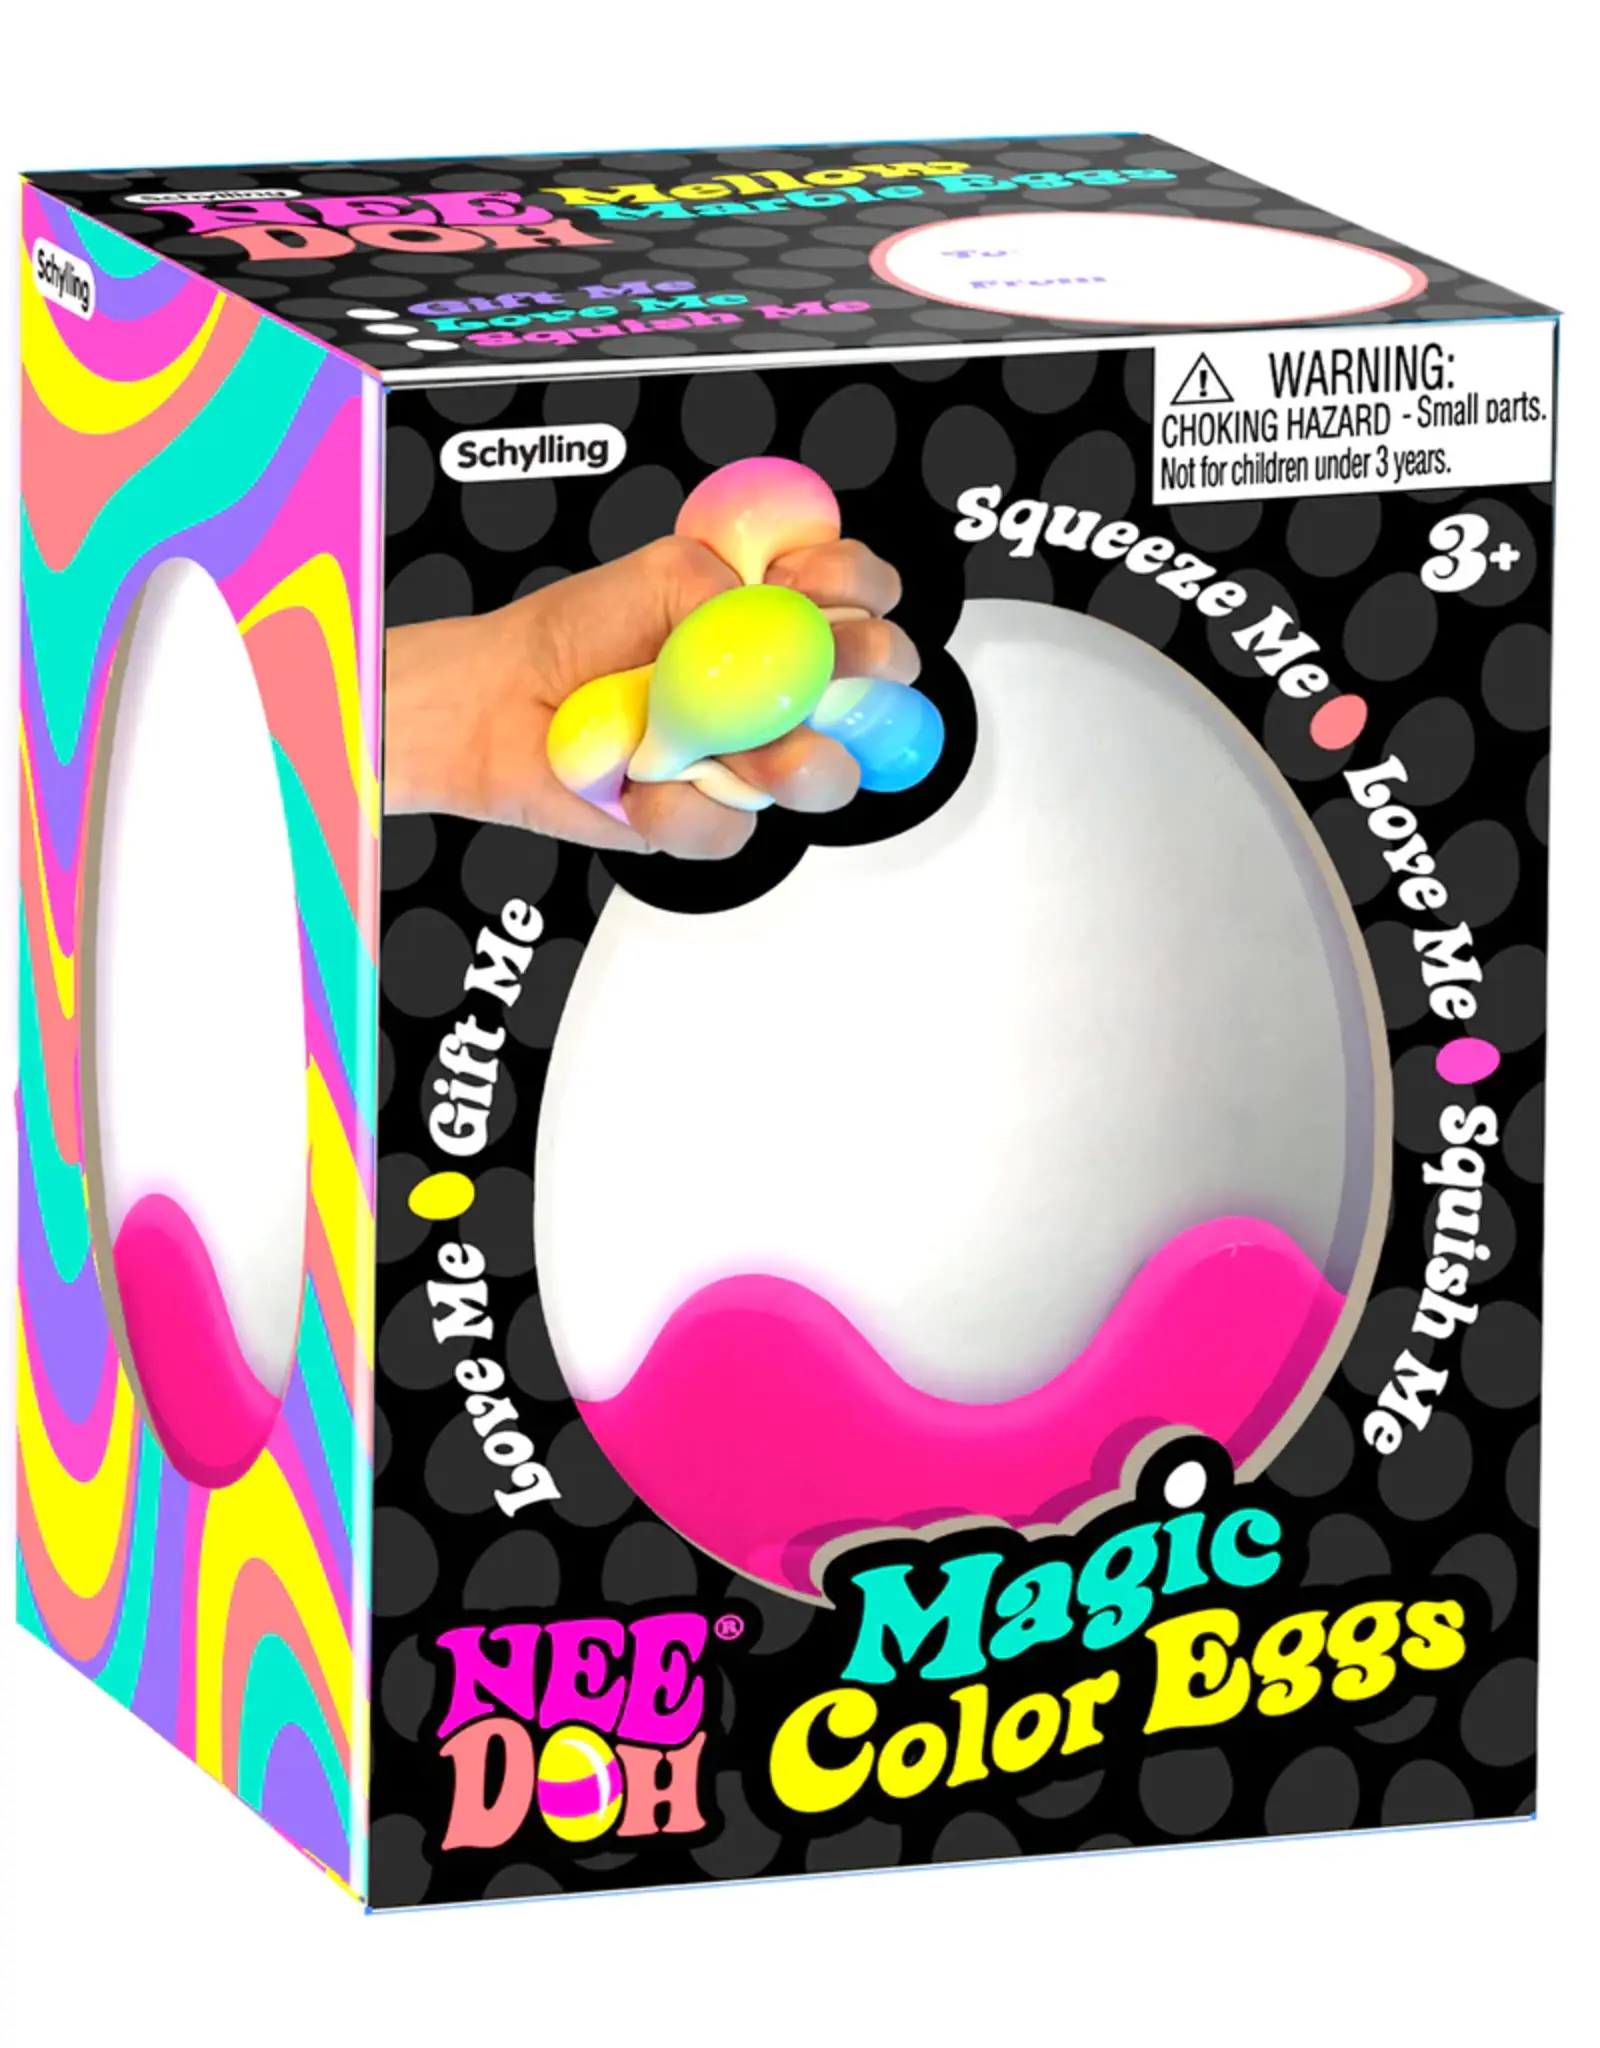 Schylling MAGIC COLOR EGG NEE DOH